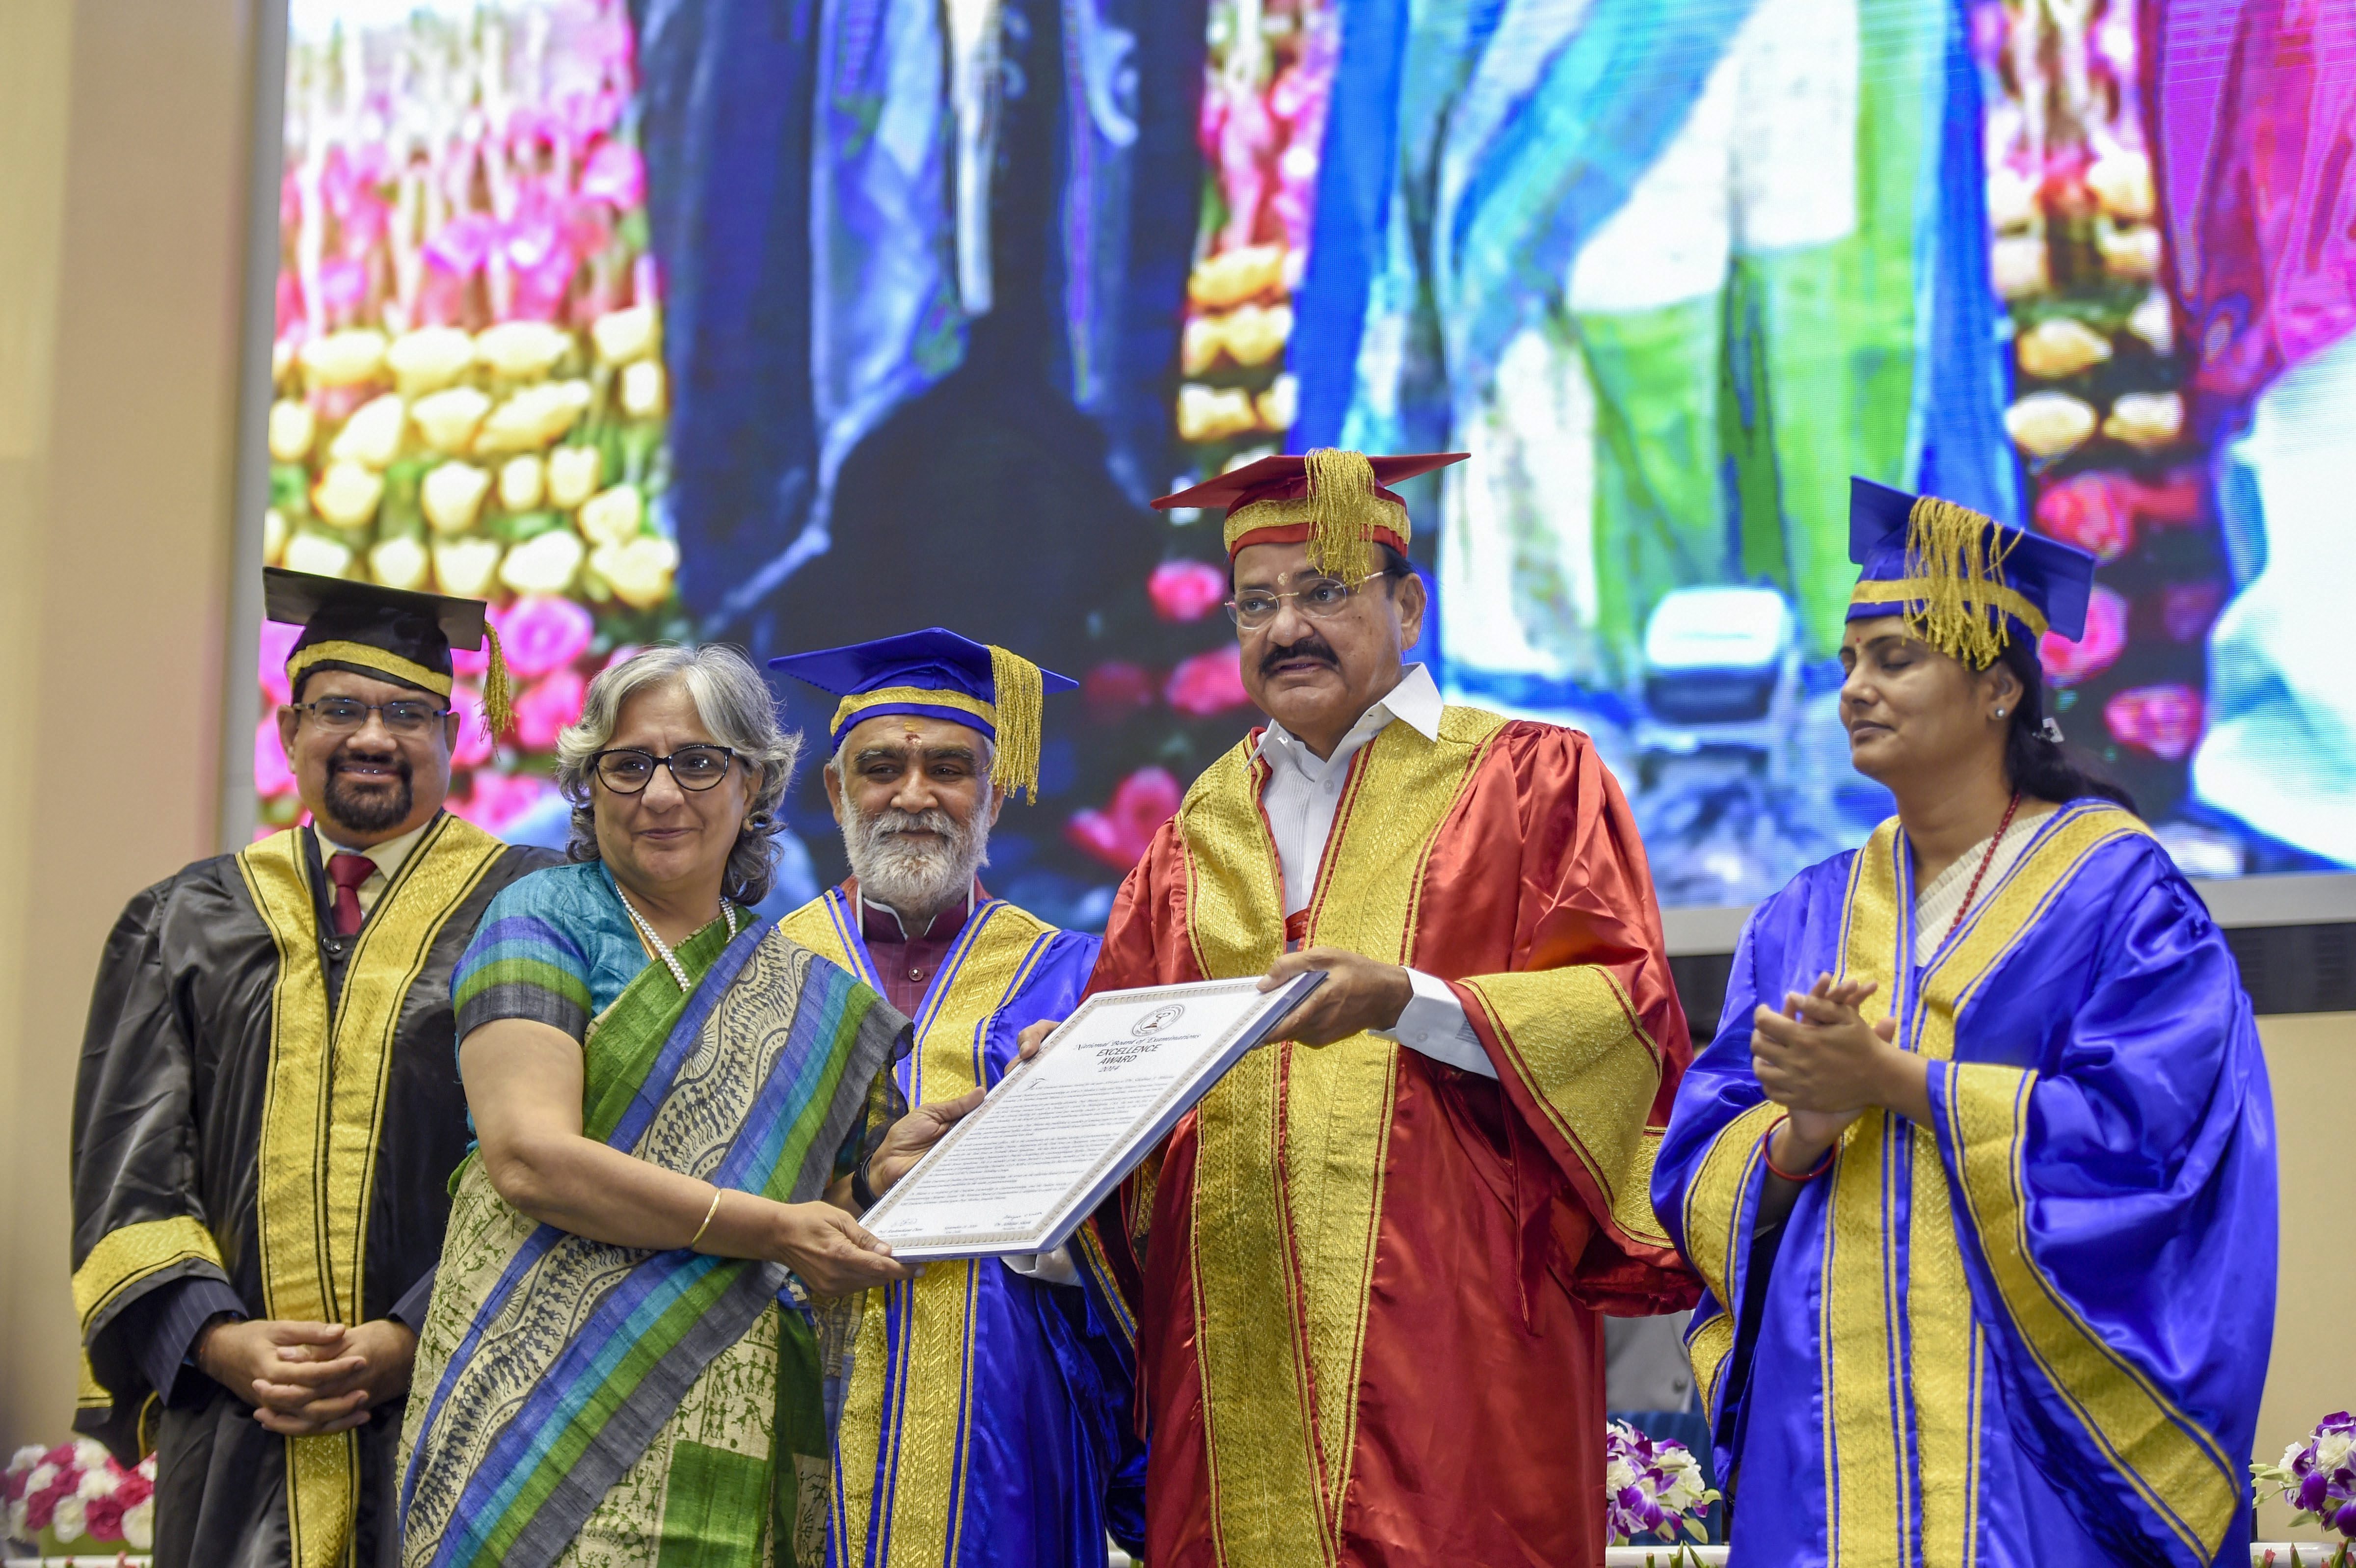 Vice President M Venkaiah Naidu presents an award during the 19th Convocation and Award Ceremony' of National Board of Examinations (NBE), in New Delhi - PTI